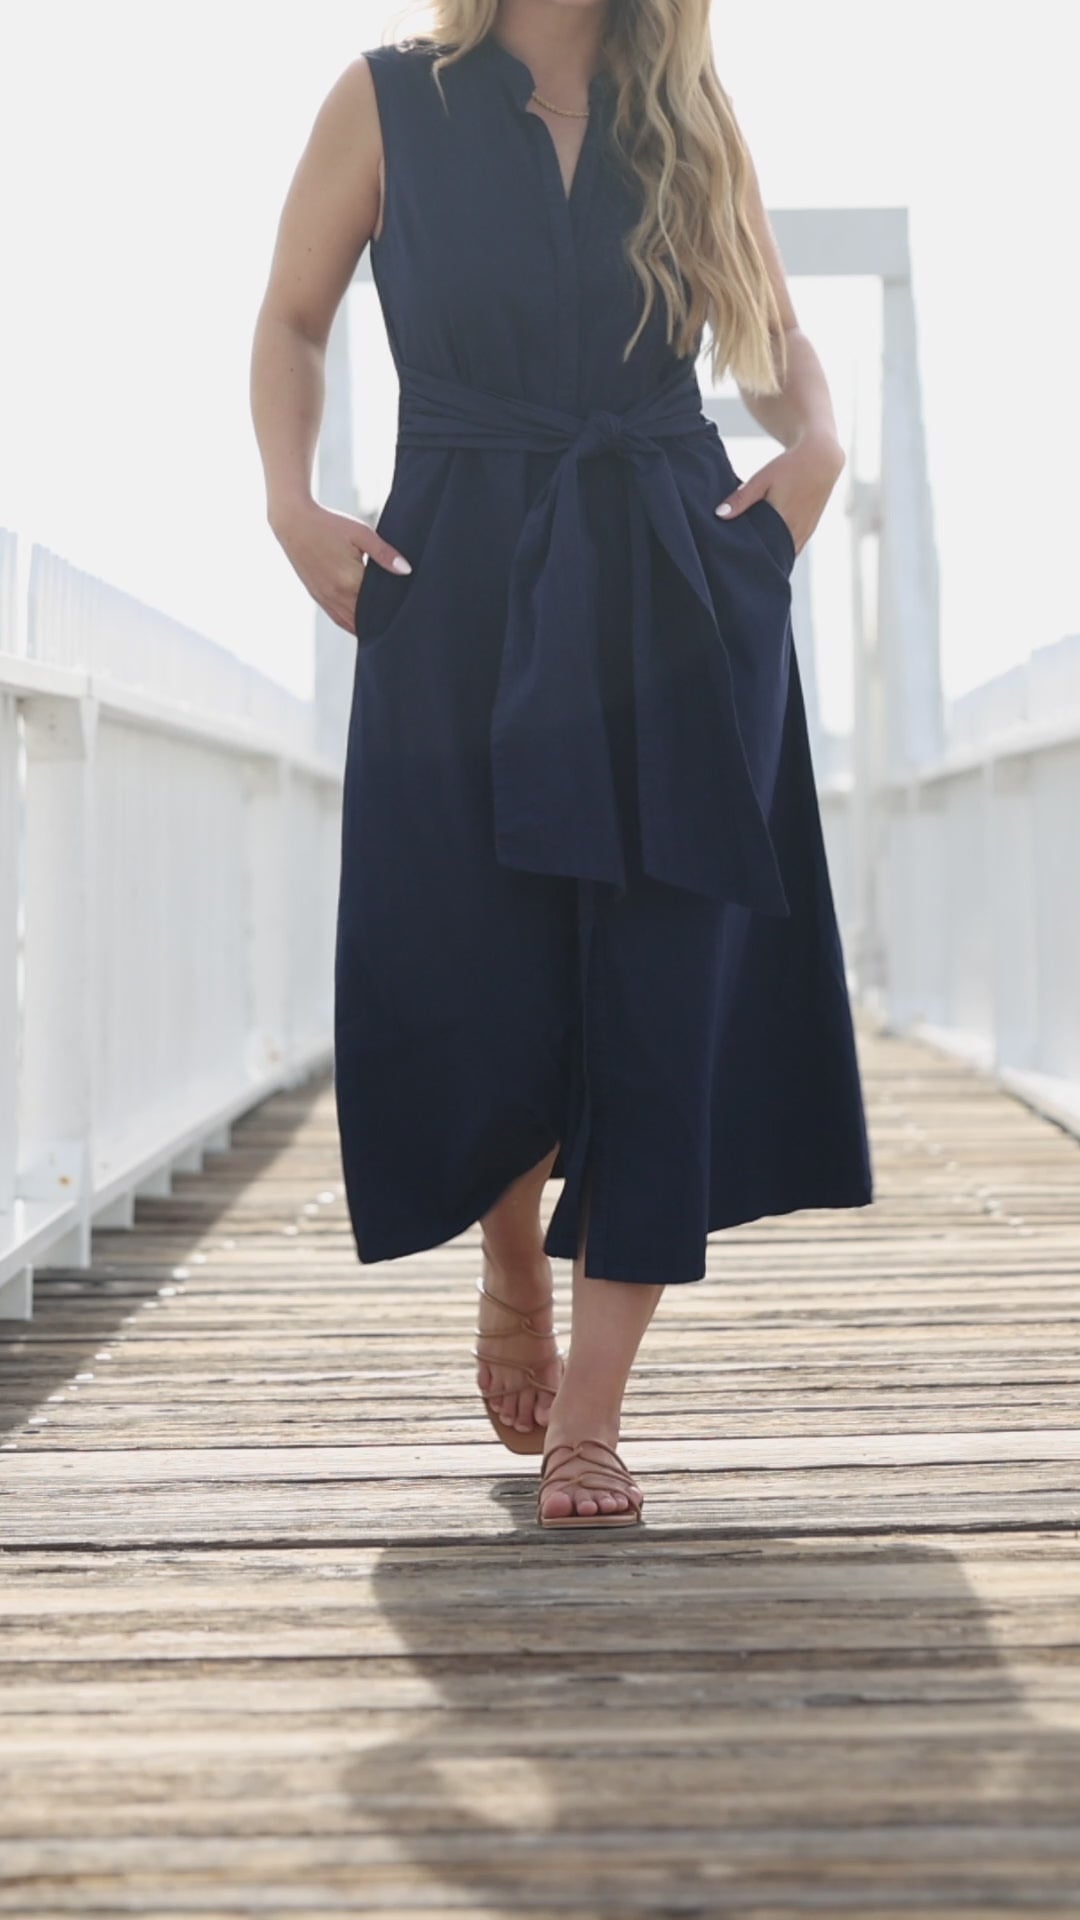 Classic East Coast style navy midi dress with tie front